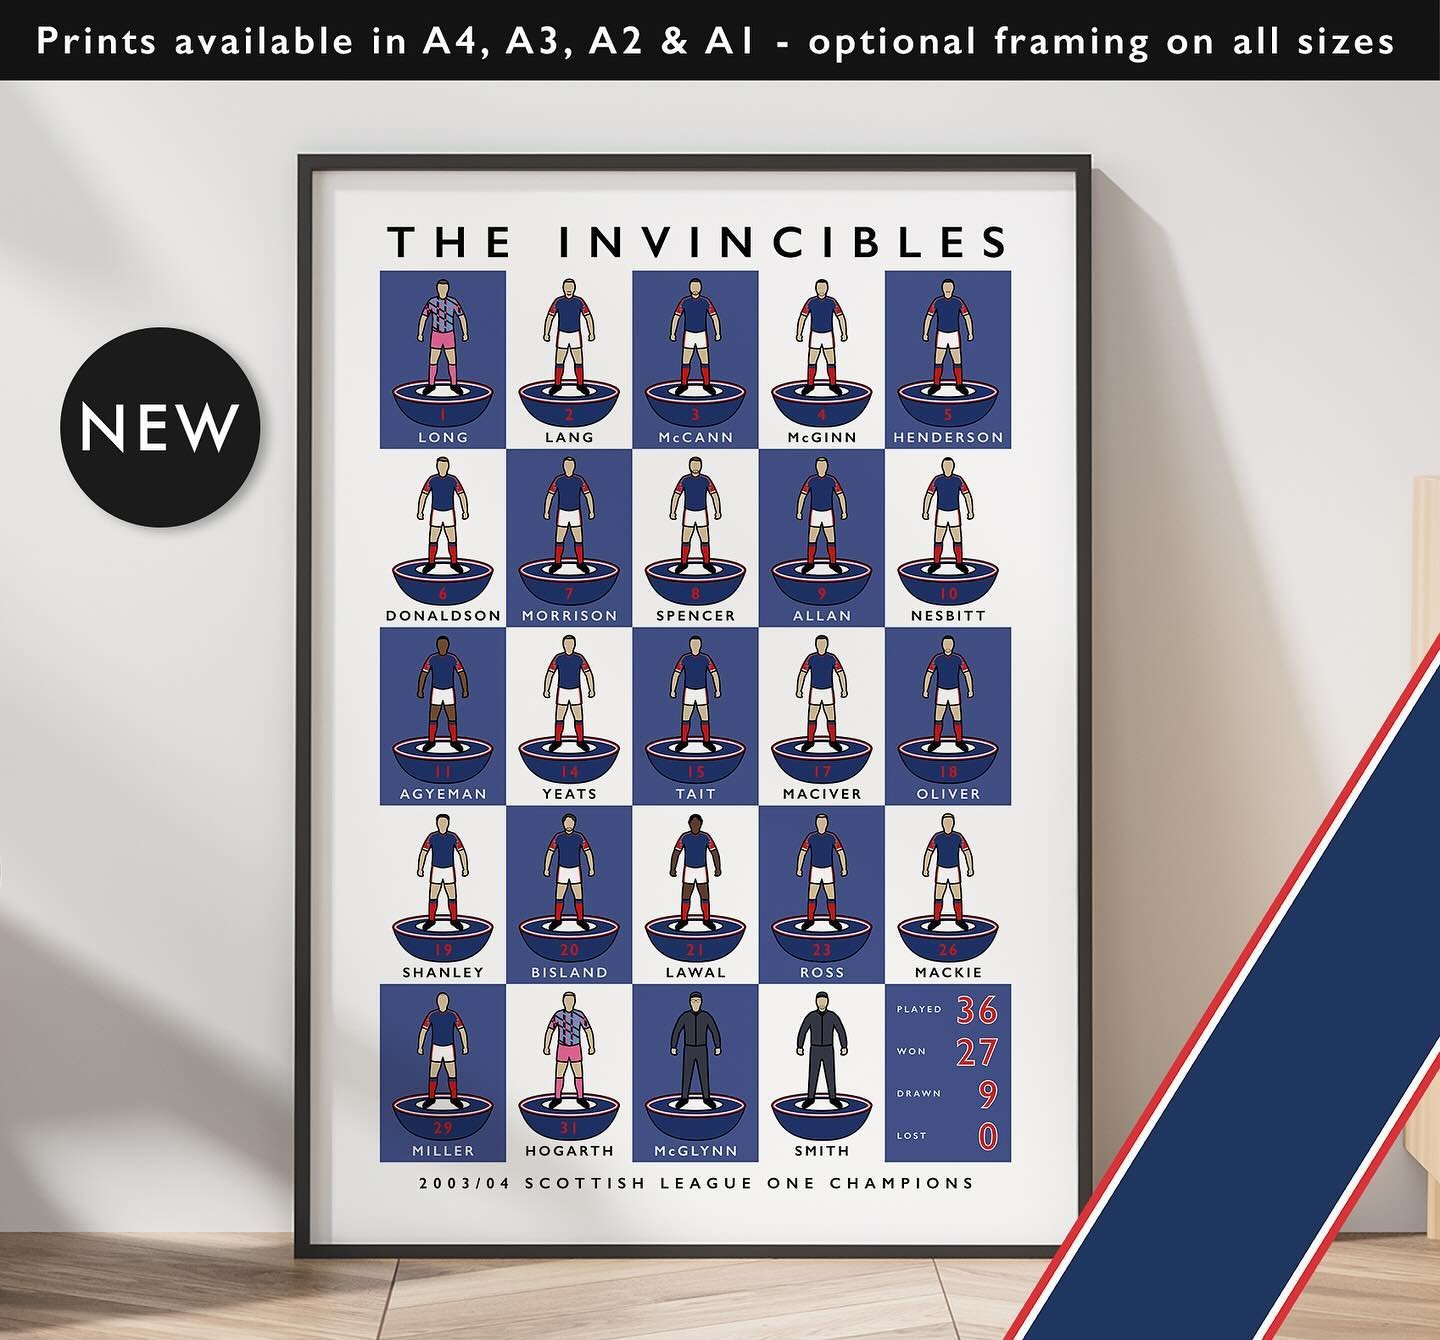 NEW: Falkirk FC The Invincibles 2023/24

Prints available in A4, A3, A2 &amp; A1 with optional framing 

Get 10% off until midnight with the discount code 
THE-BAIRNS

Shop now: matthewjiwood.com/subbuteo-xis/f&hellip;

#Falkirk #FalkirkFC #Bairns